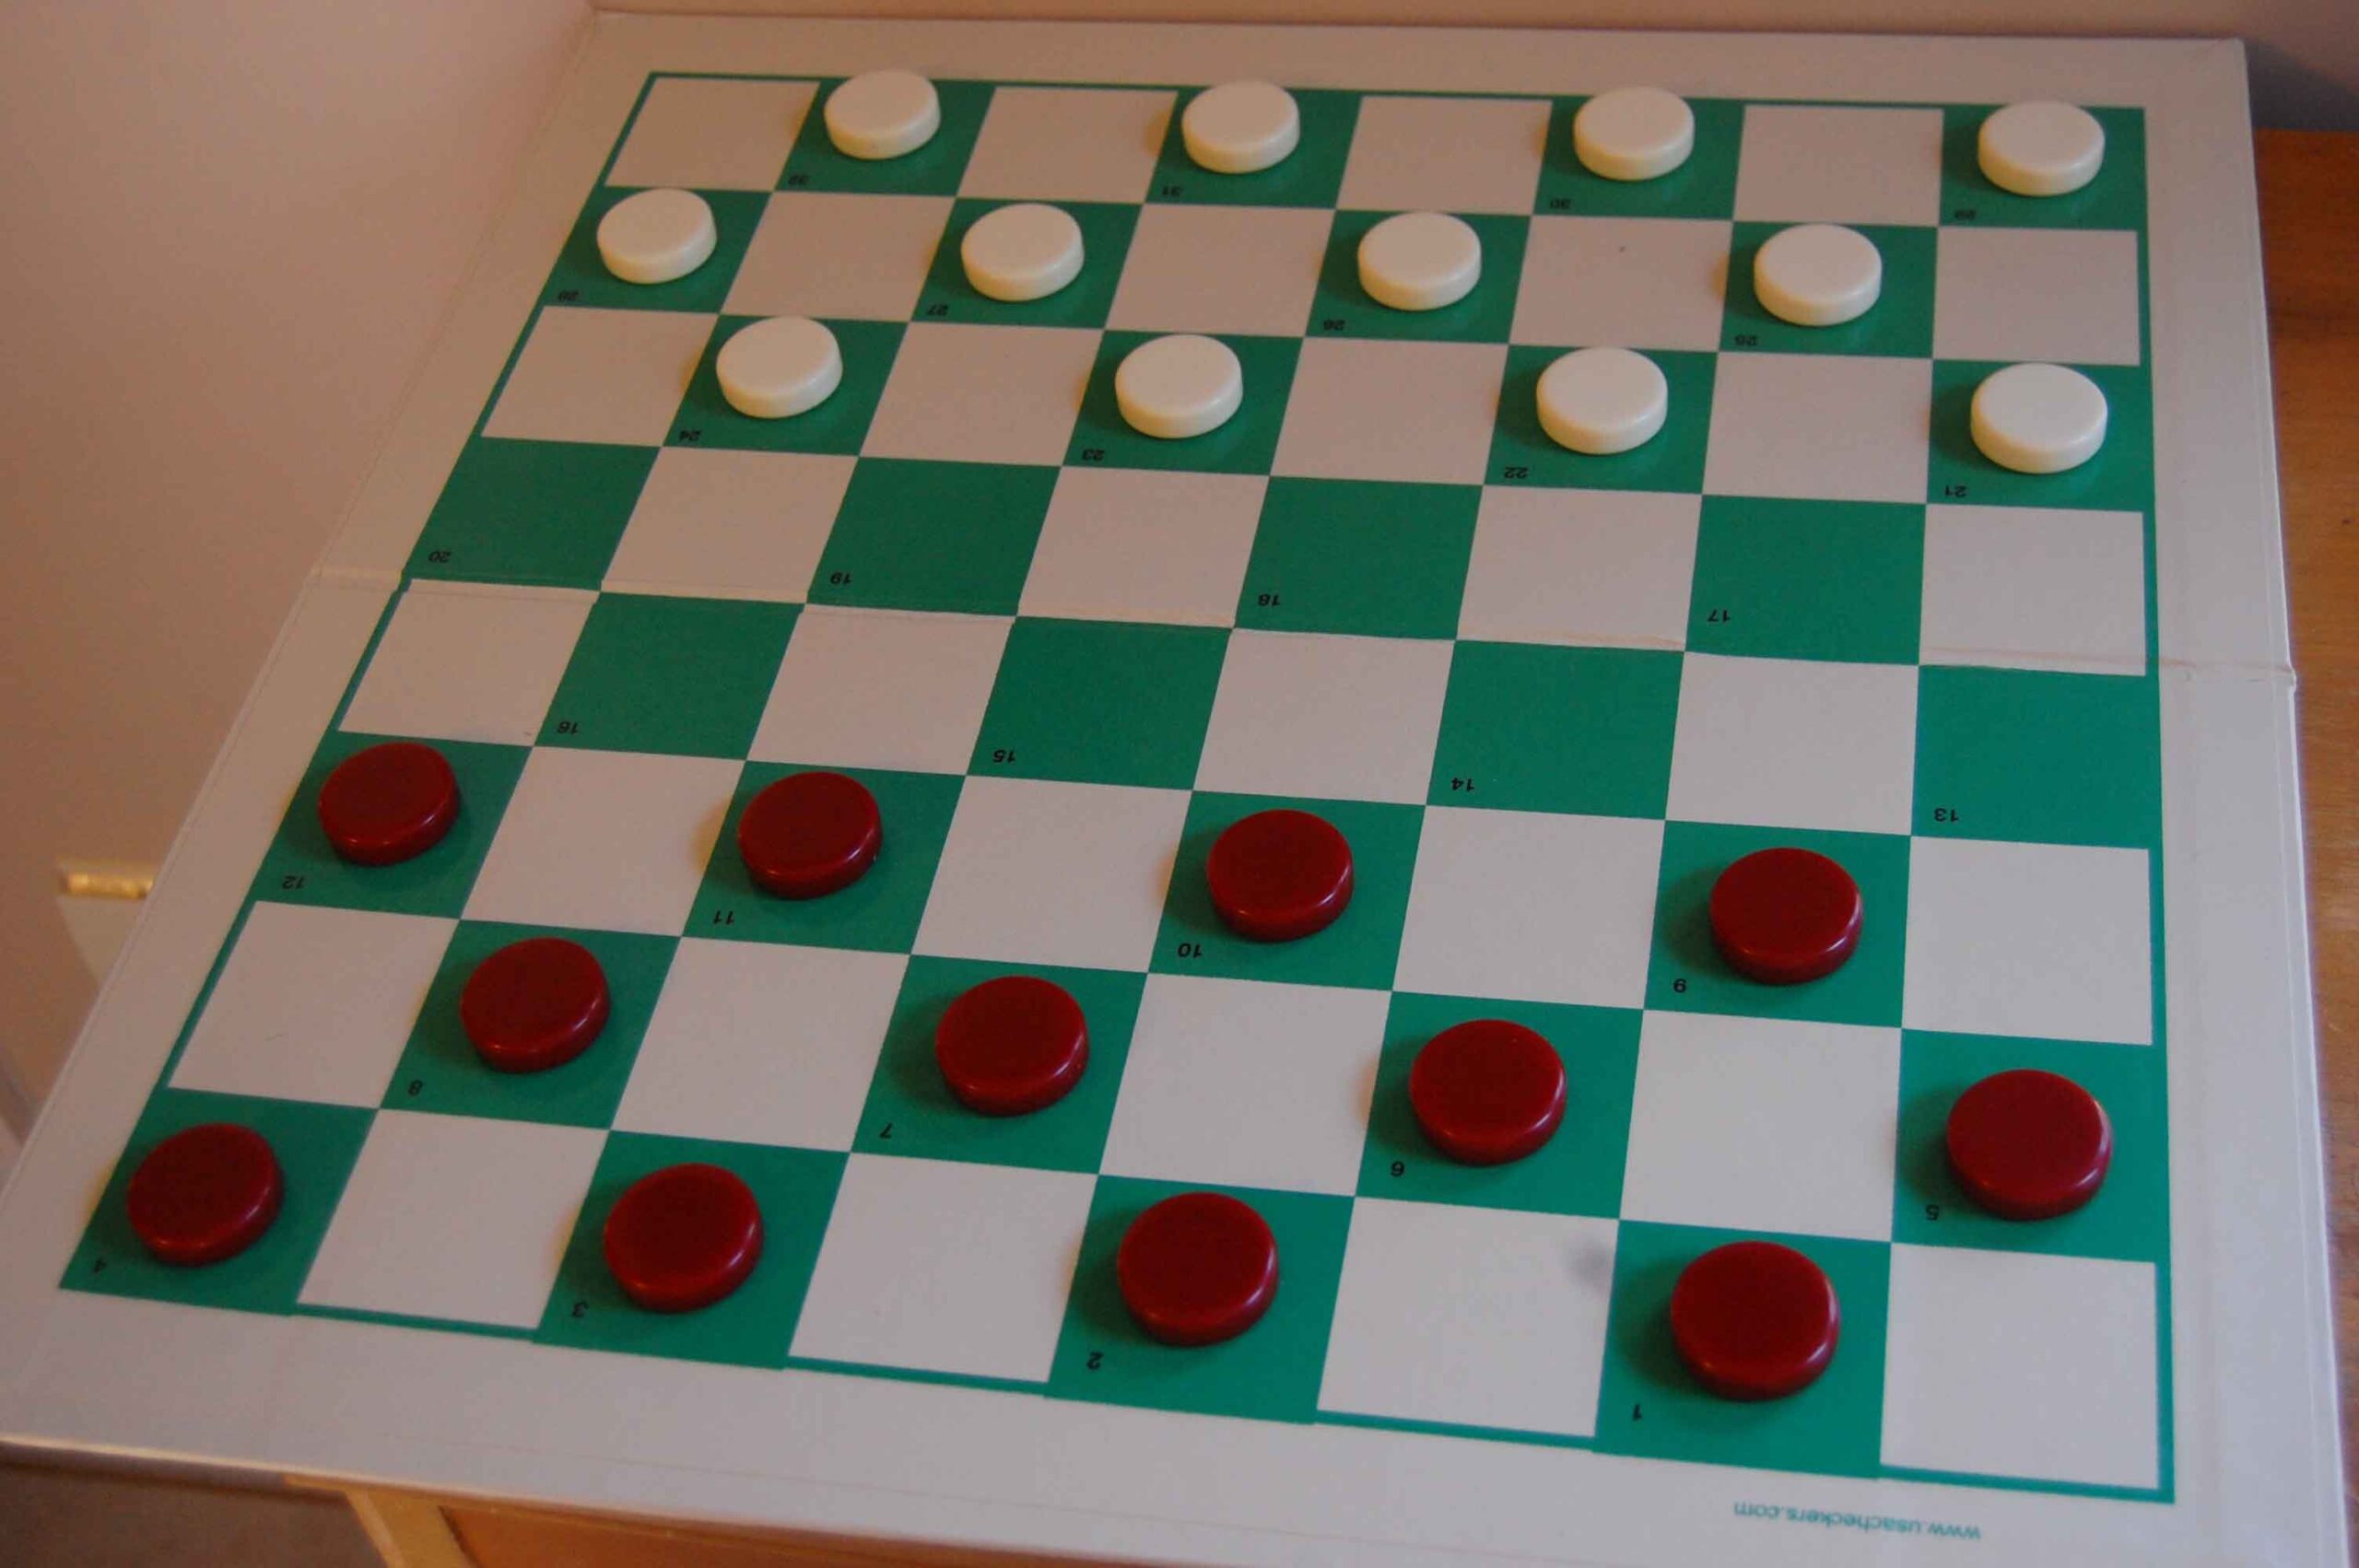 starting position for American checkers on an 8x8 checkerboard black(red) moves first